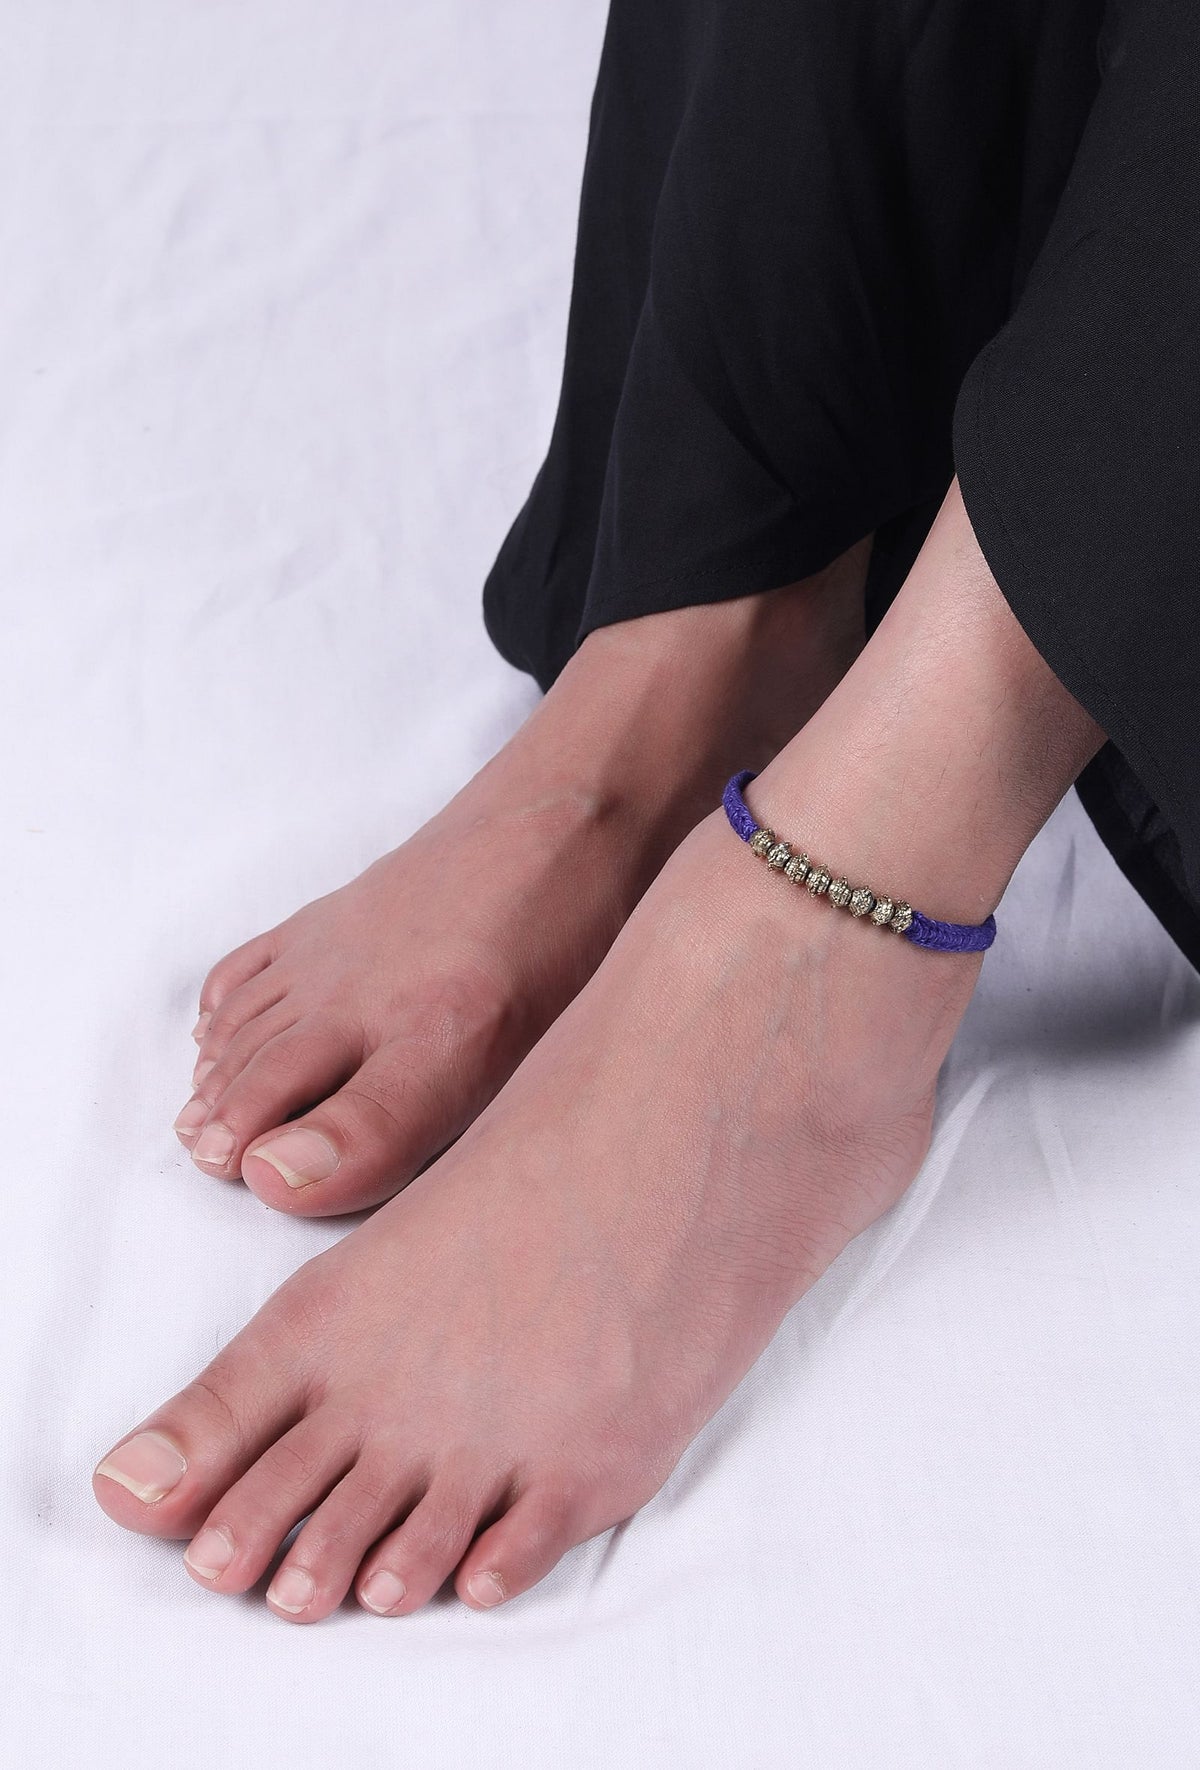 Set Of 2: Inika Purple Thread & Antique Plated Brass Beaded Anklets